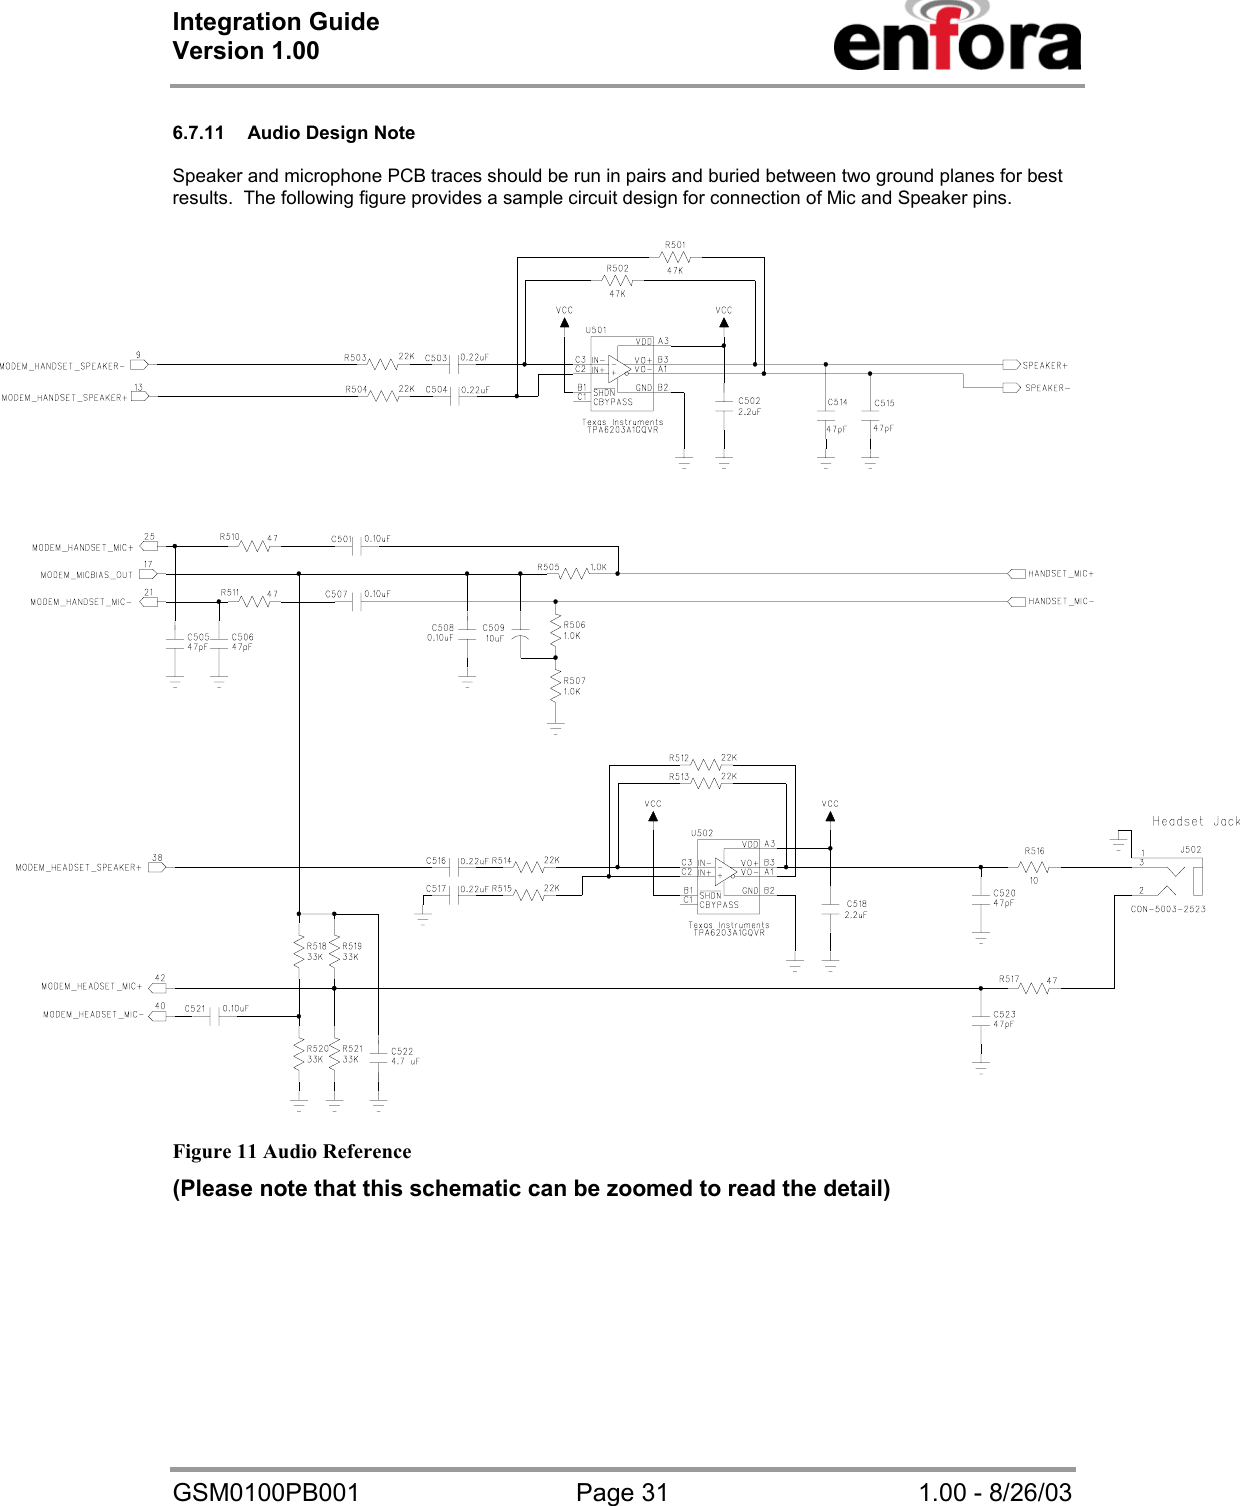 Integration Guide  Version 1.00   GSM0100PB001  Page 31  1.00 - 8/26/03  6.7.11  Audio Design Note  Speaker and microphone PCB traces should be run in pairs and buried between two ground planes for best results.  The following figure provides a sample circuit design for connection of Mic and Speaker pins.   Figure 11 Audio Reference (Please note that this schematic can be zoomed to read the detail) 